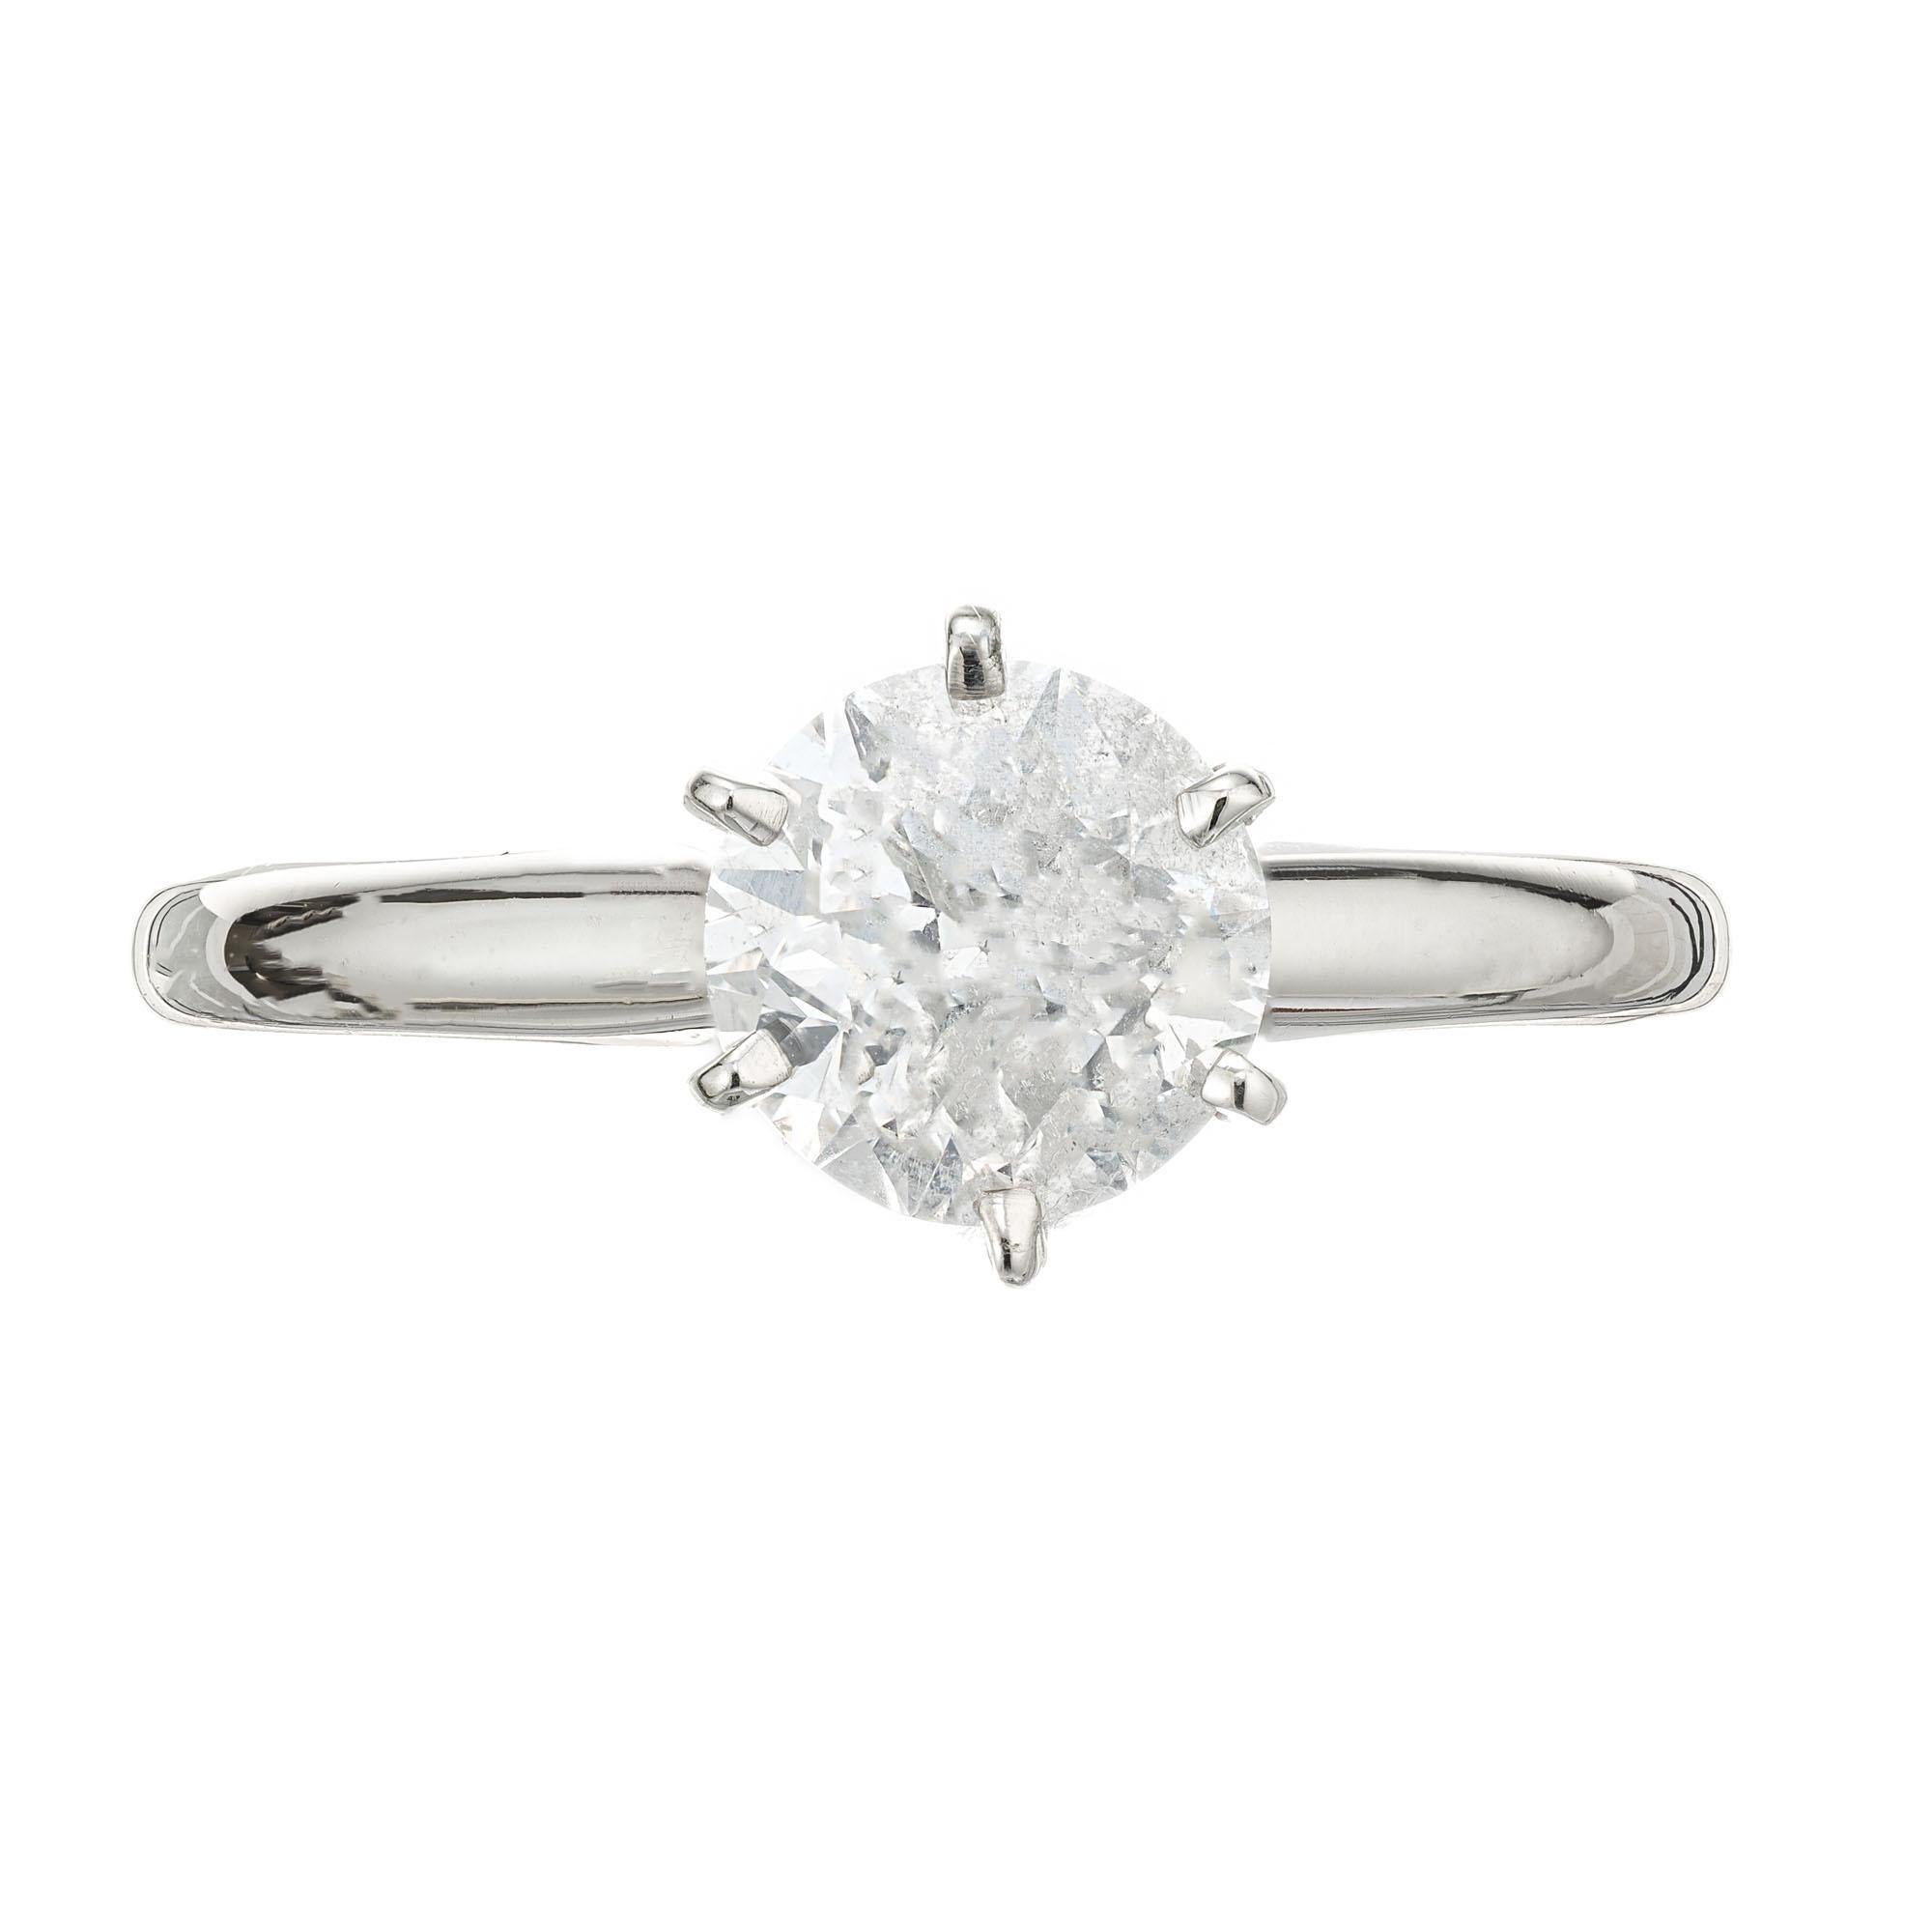 Diamond solitaire engagement ring. EGL certified round brilliant cut center stone in a six prong 14k white gold setting. 

1 EGL certified (#US66679301D
) round diamond approx. total weight 1.51cts, F-G, I1. 2.8 grams.  68.9% depth and 55%